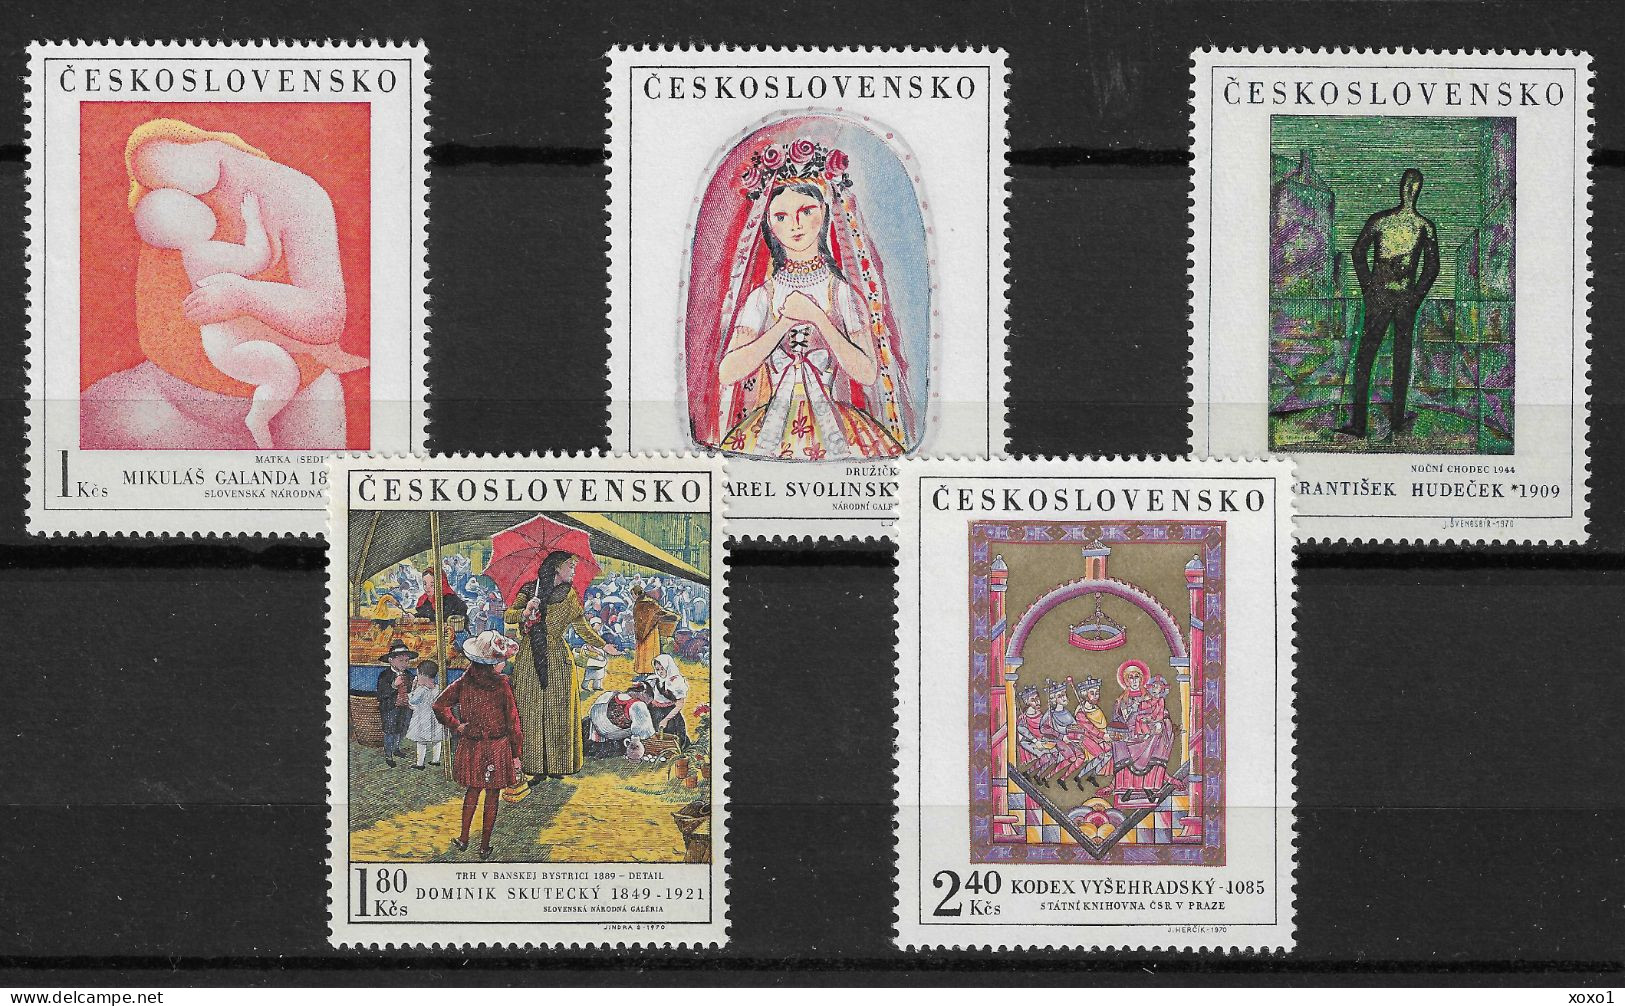 Czechoslovakia 1970 MiNr. 1965 - 1969 National Galleries (V)  Art, Painting 5v  MNH**  7.00 € - Unused Stamps